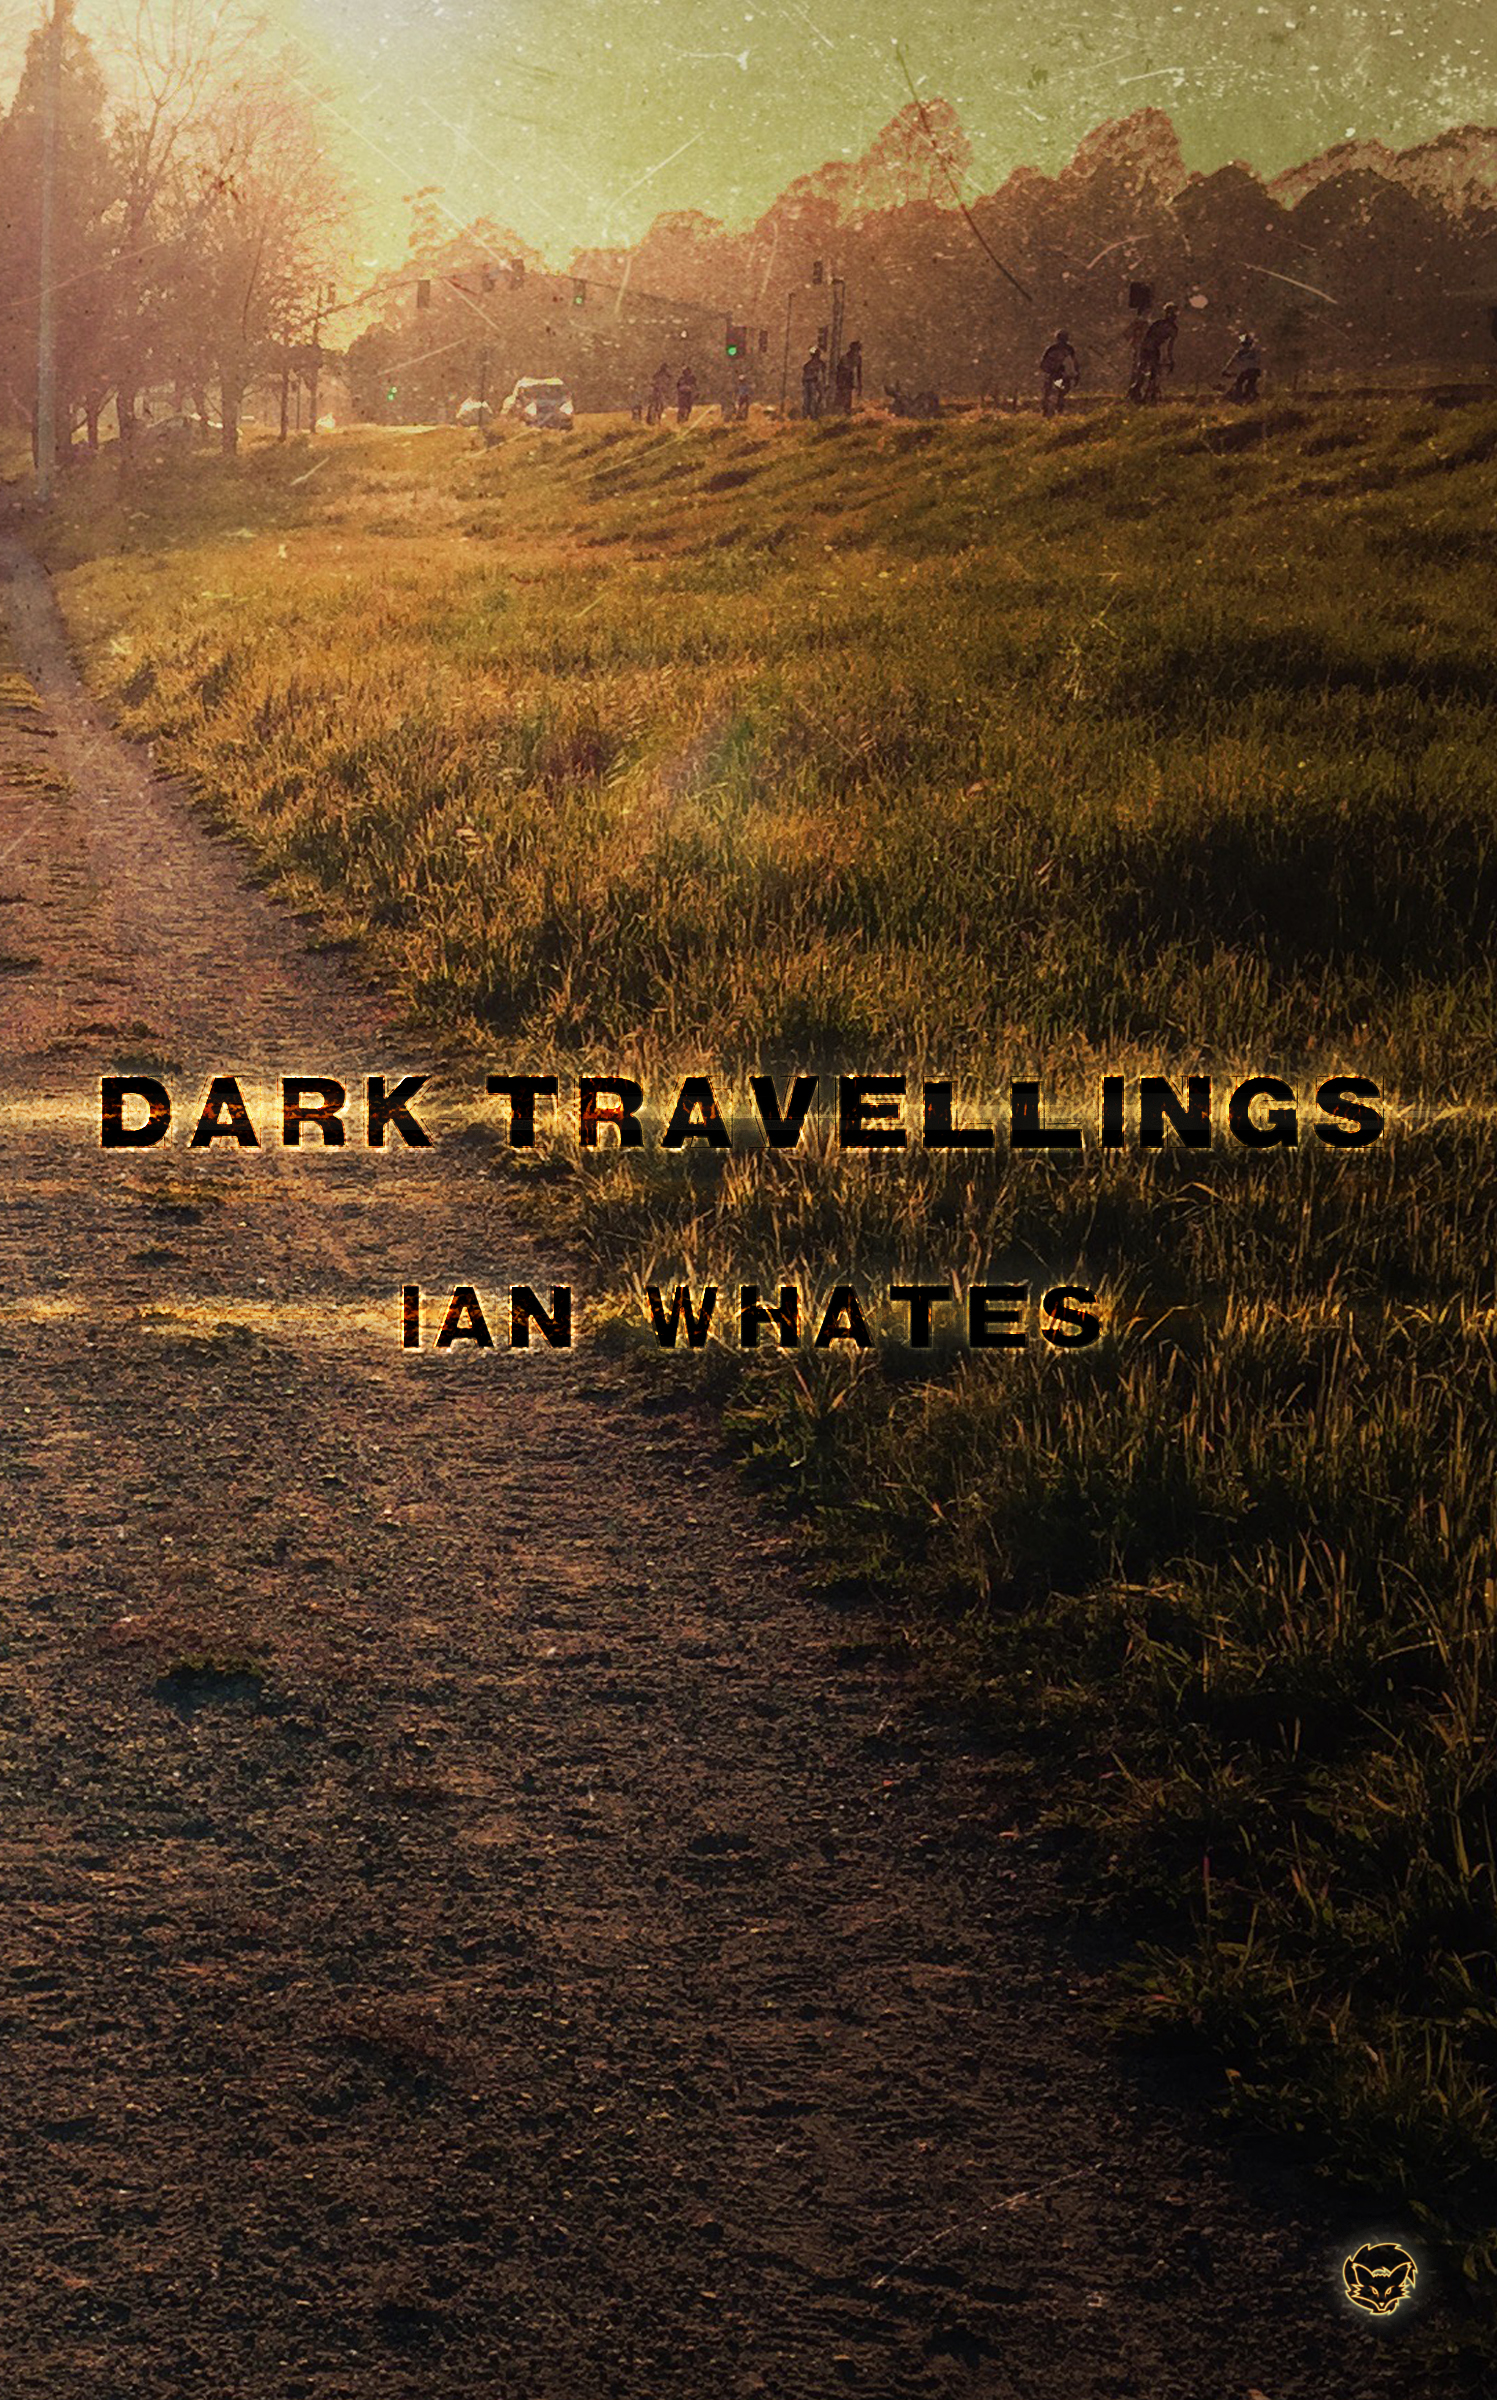 Dark Travellings by Ian Whates